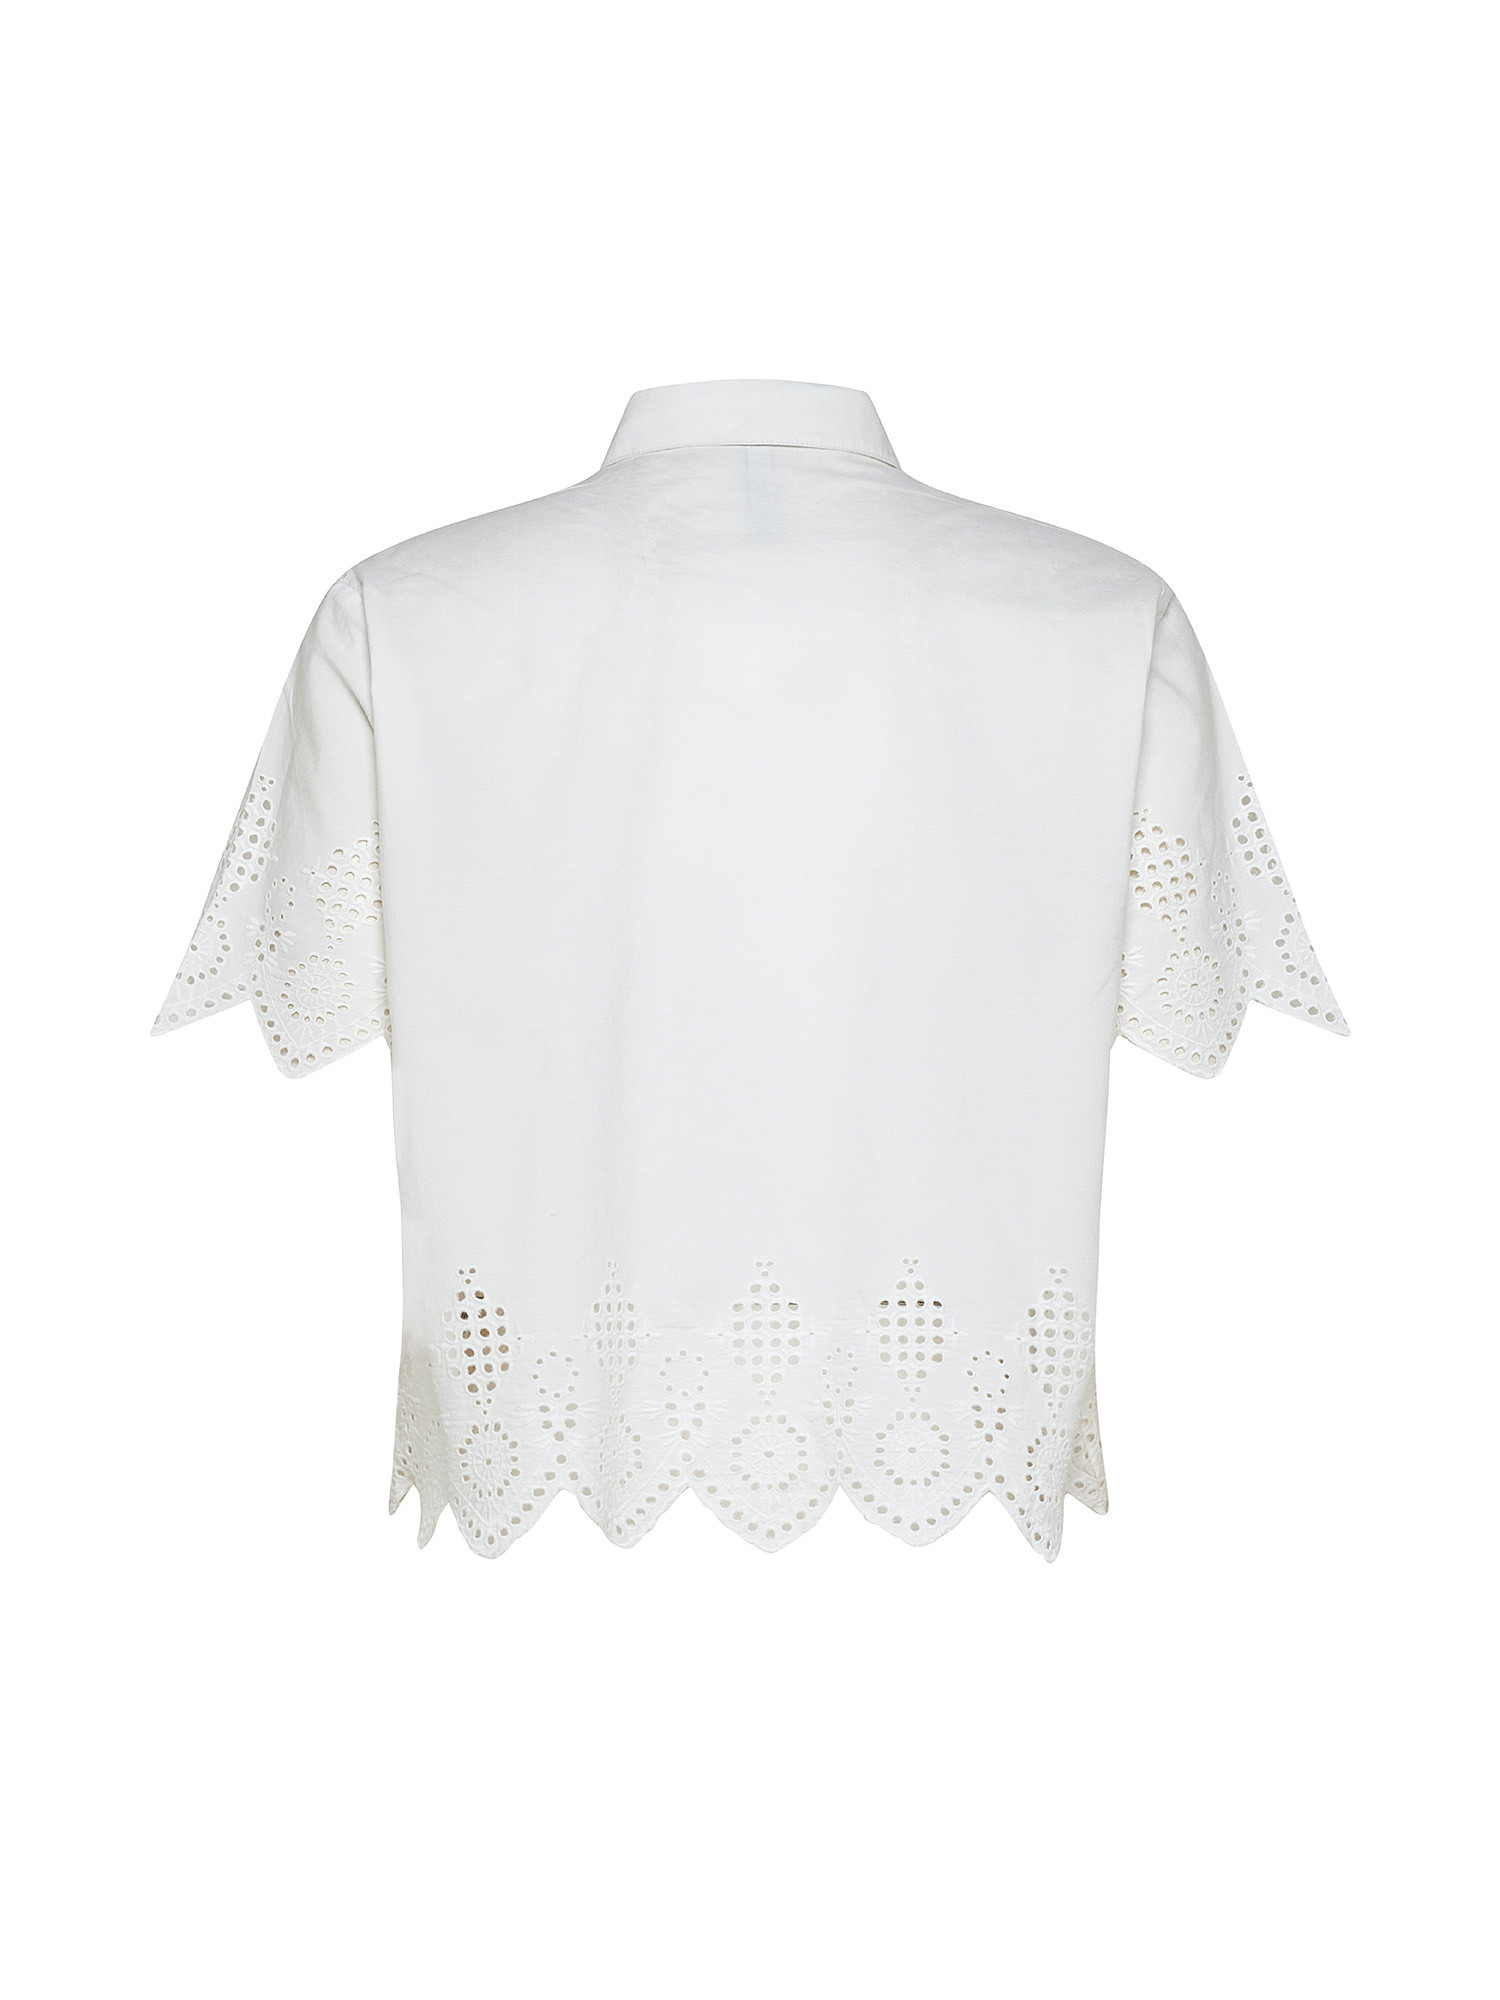 Laura openwork details shirt, White, large image number 1